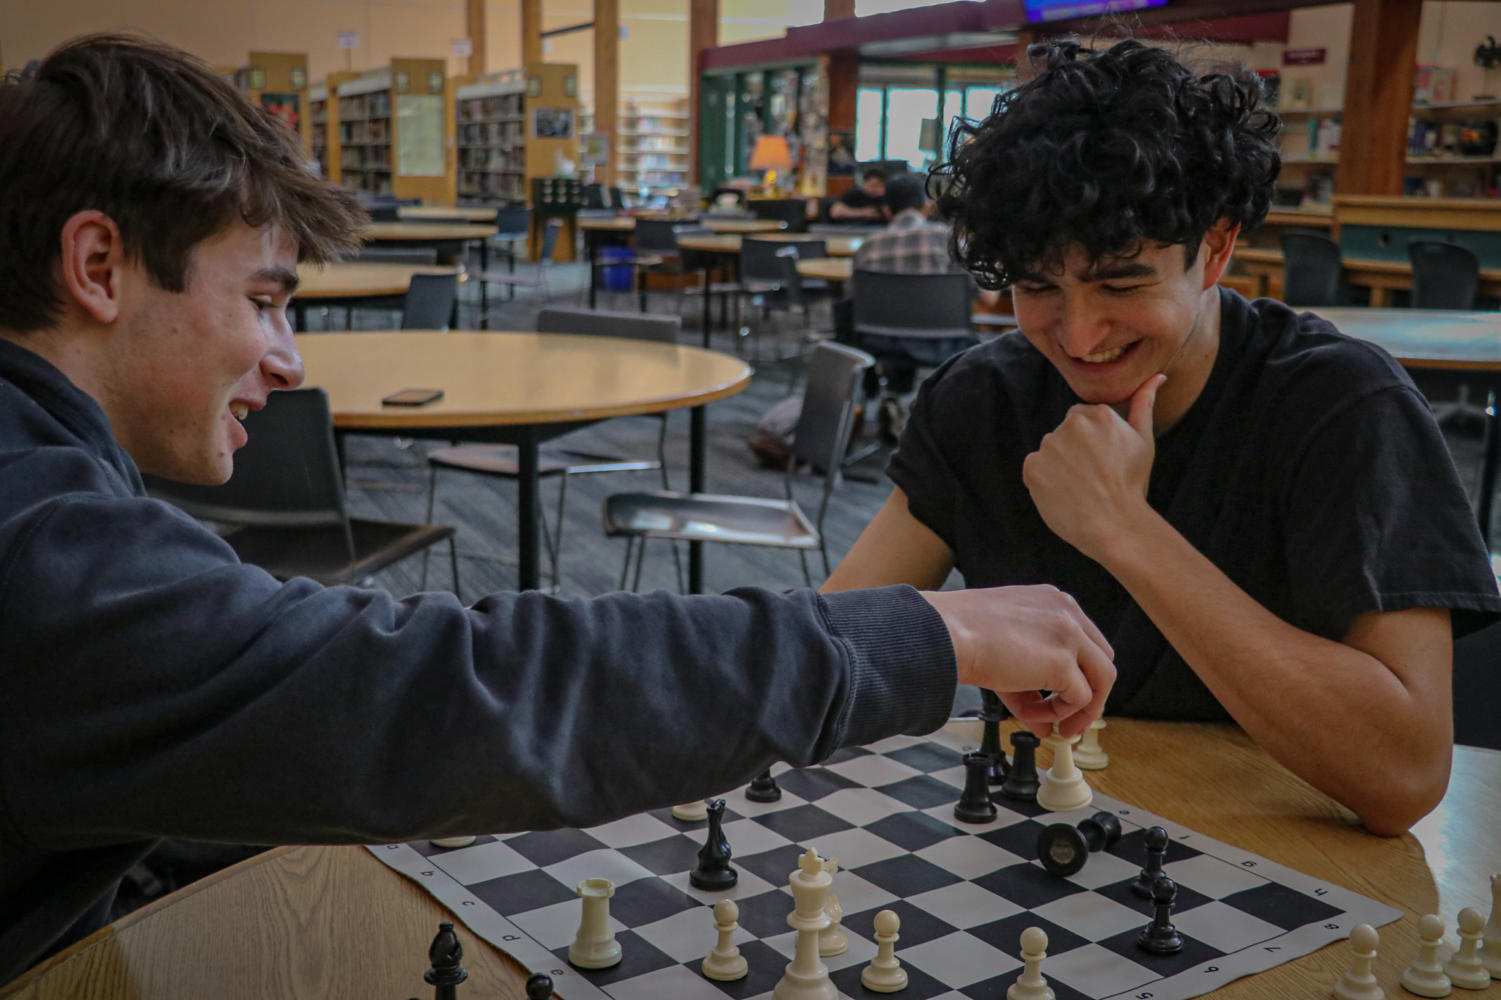 Chess+club%E2%80%99s+senior+Vice+president+Liam+Shalom+captures+senior+President+Roan+Howard%E2%80%99s+queen+during+an+intense+chess+match+in+the+library+after+school.